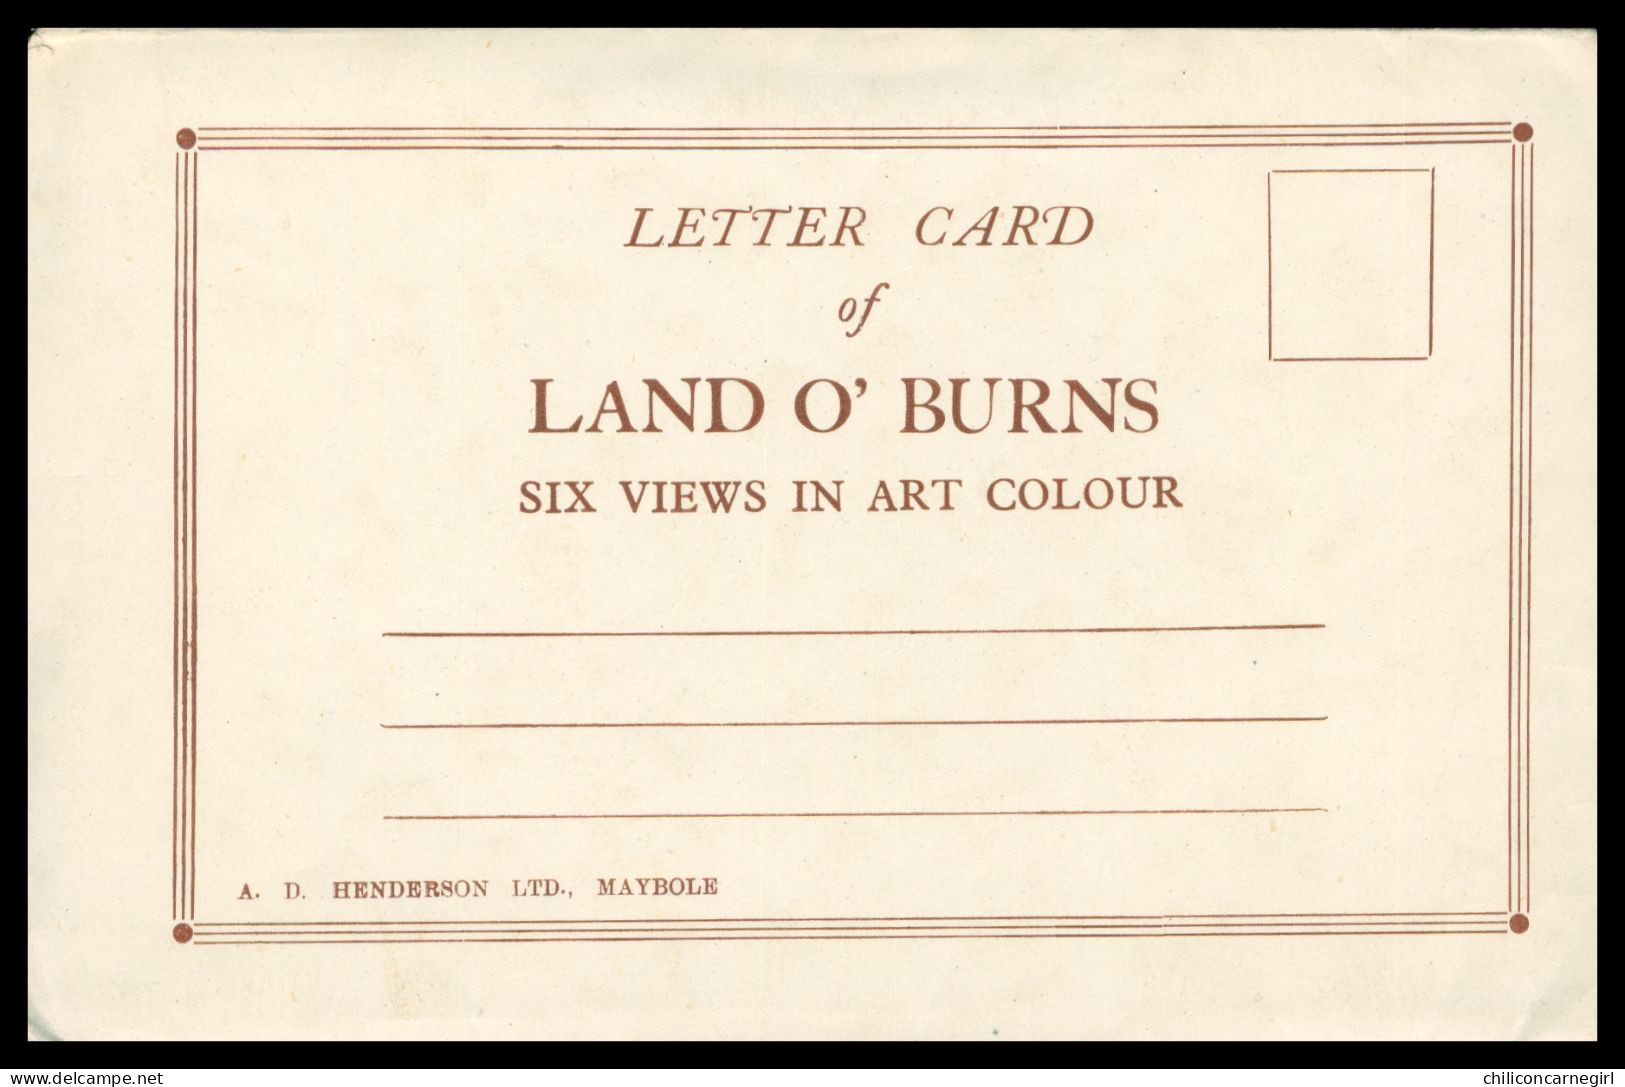 * AYR Letter Card of LAND O' BURNS - Six Views in art colour - Carte lettre de LAND O' BURNS - Six vues - Ed. HENDERSON